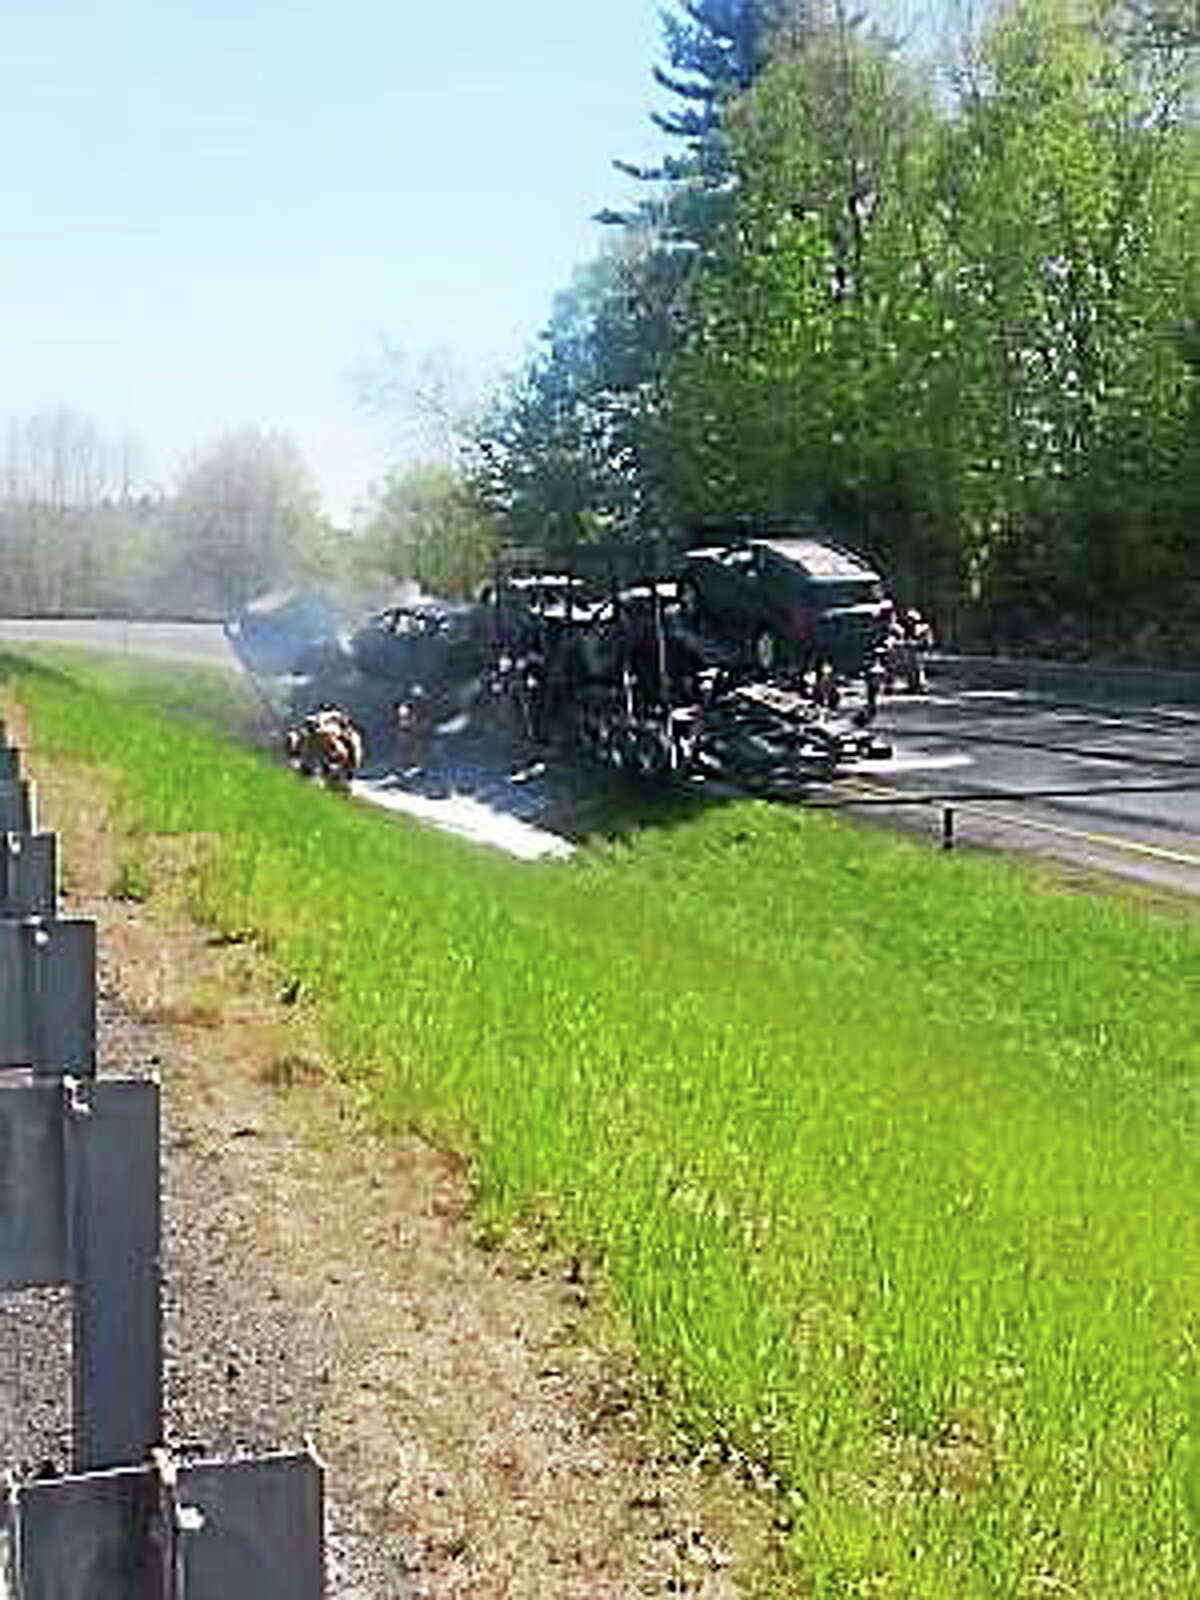 A truck hit the guardrail on Interstate-91 in Vermont, between Exits 4 and 5, and caught fire, forcing the closure of the road for several hours. (Photo courtesy of the Red Cross)